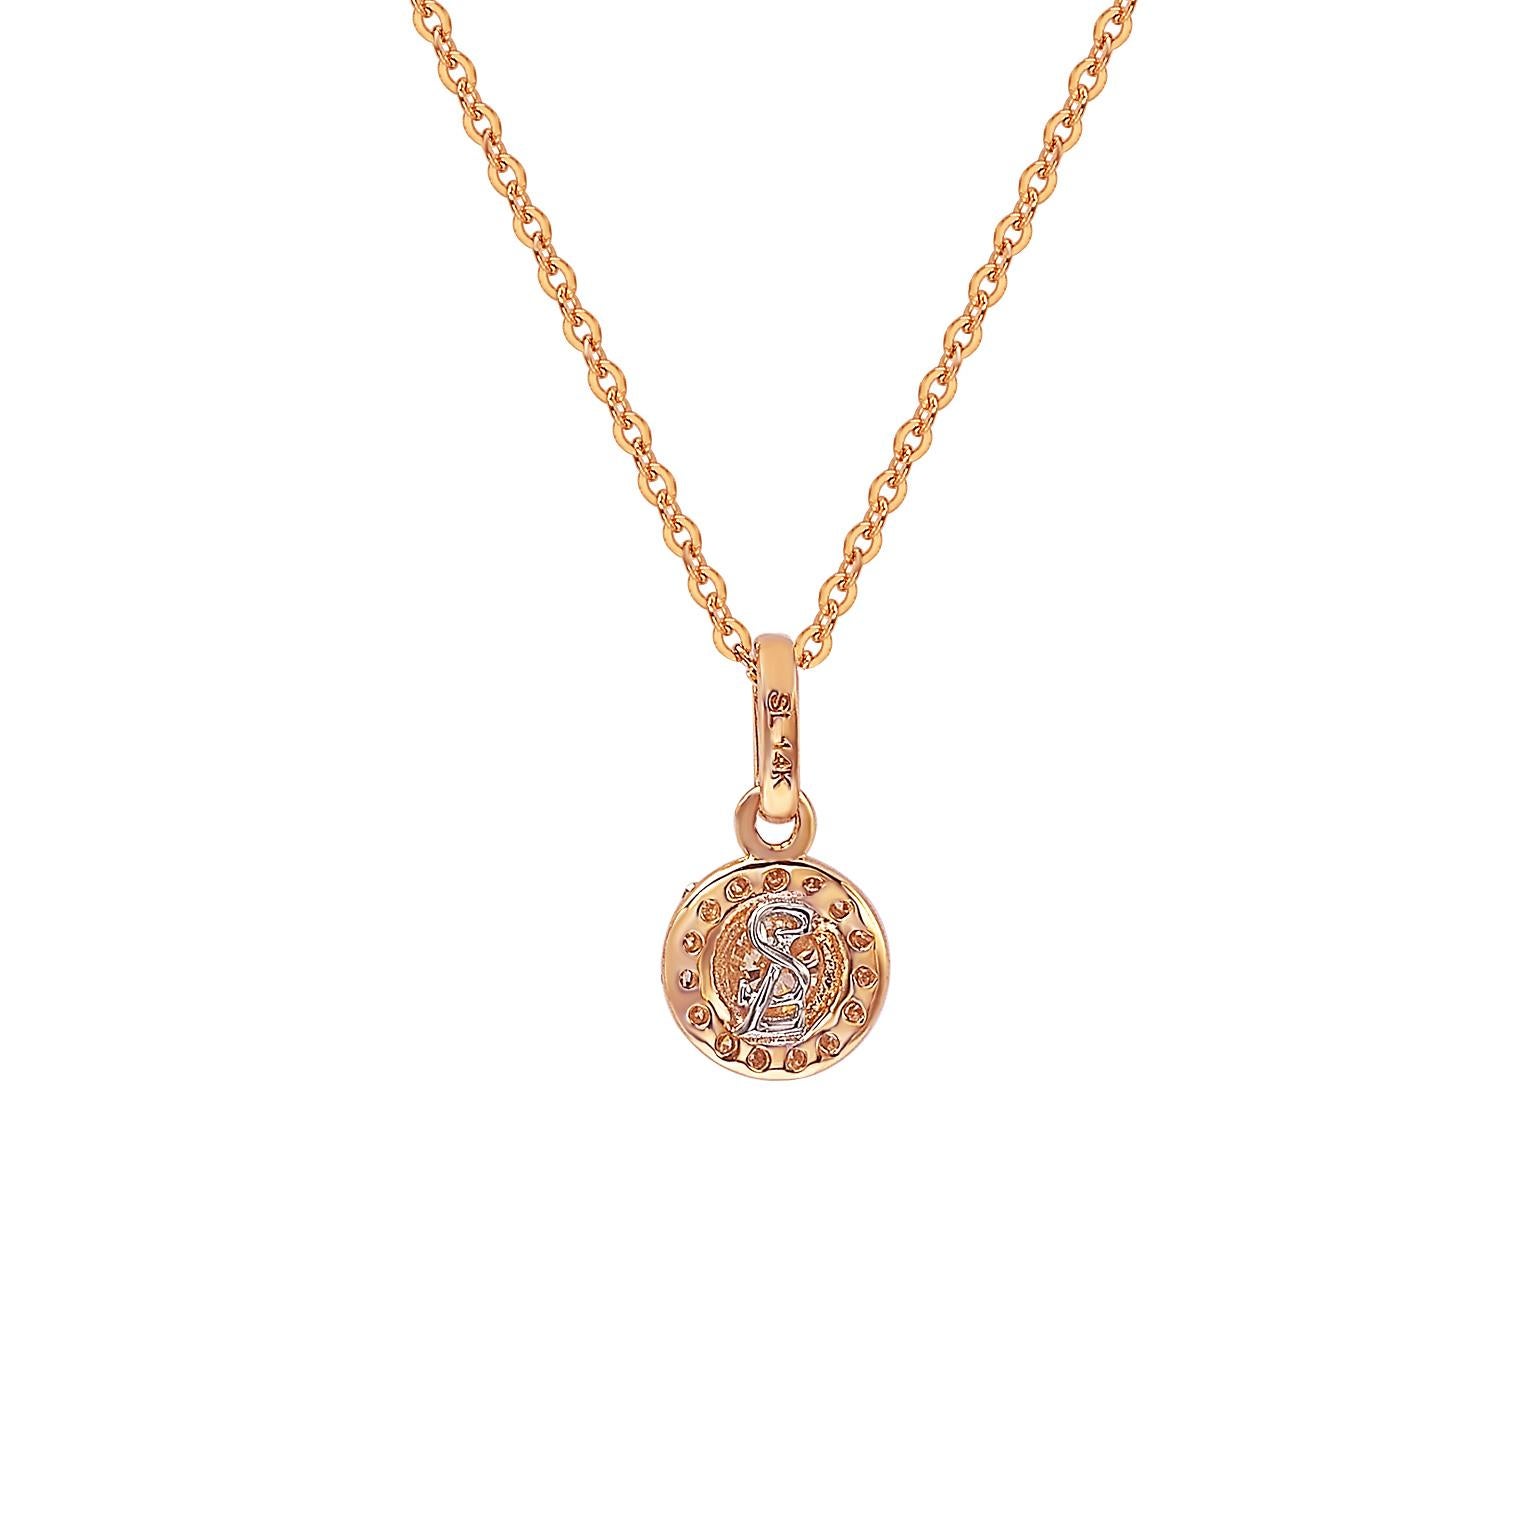 This elegant Suzy Levian diamond halo pendant displays round-cut diamonds on 14 karat rose gold setting. This gorgeous pendant contains 20 white round cut diamonds totaling .35 cttw. The larger center stone is 4 mm in size and has a halo of 1 mm